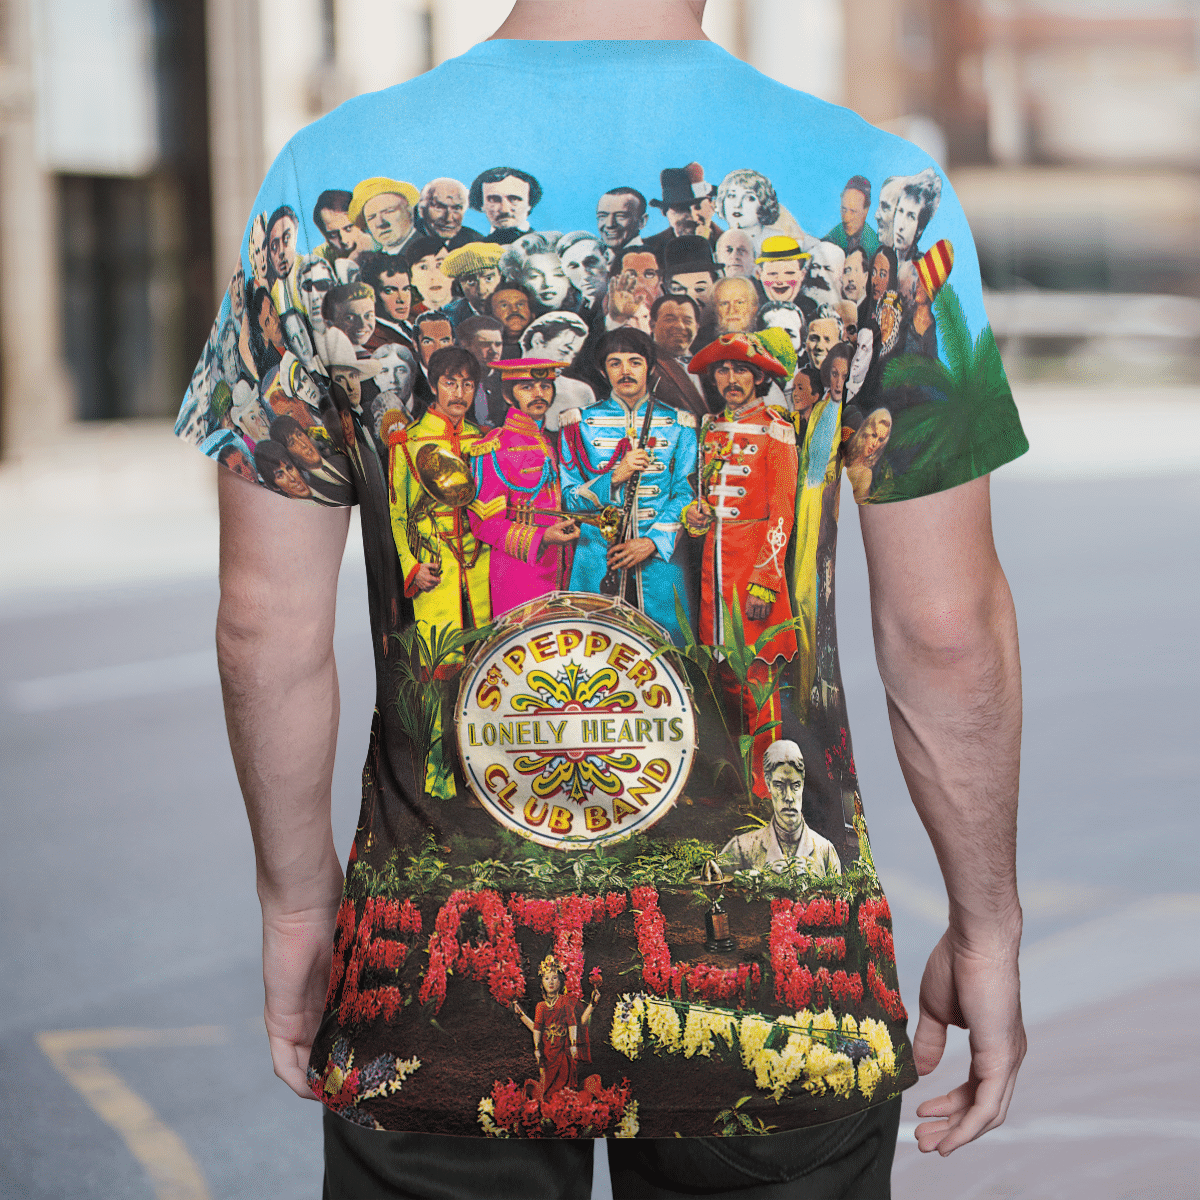 The B Sgt. Pepper's Lonely Hearts Club Band